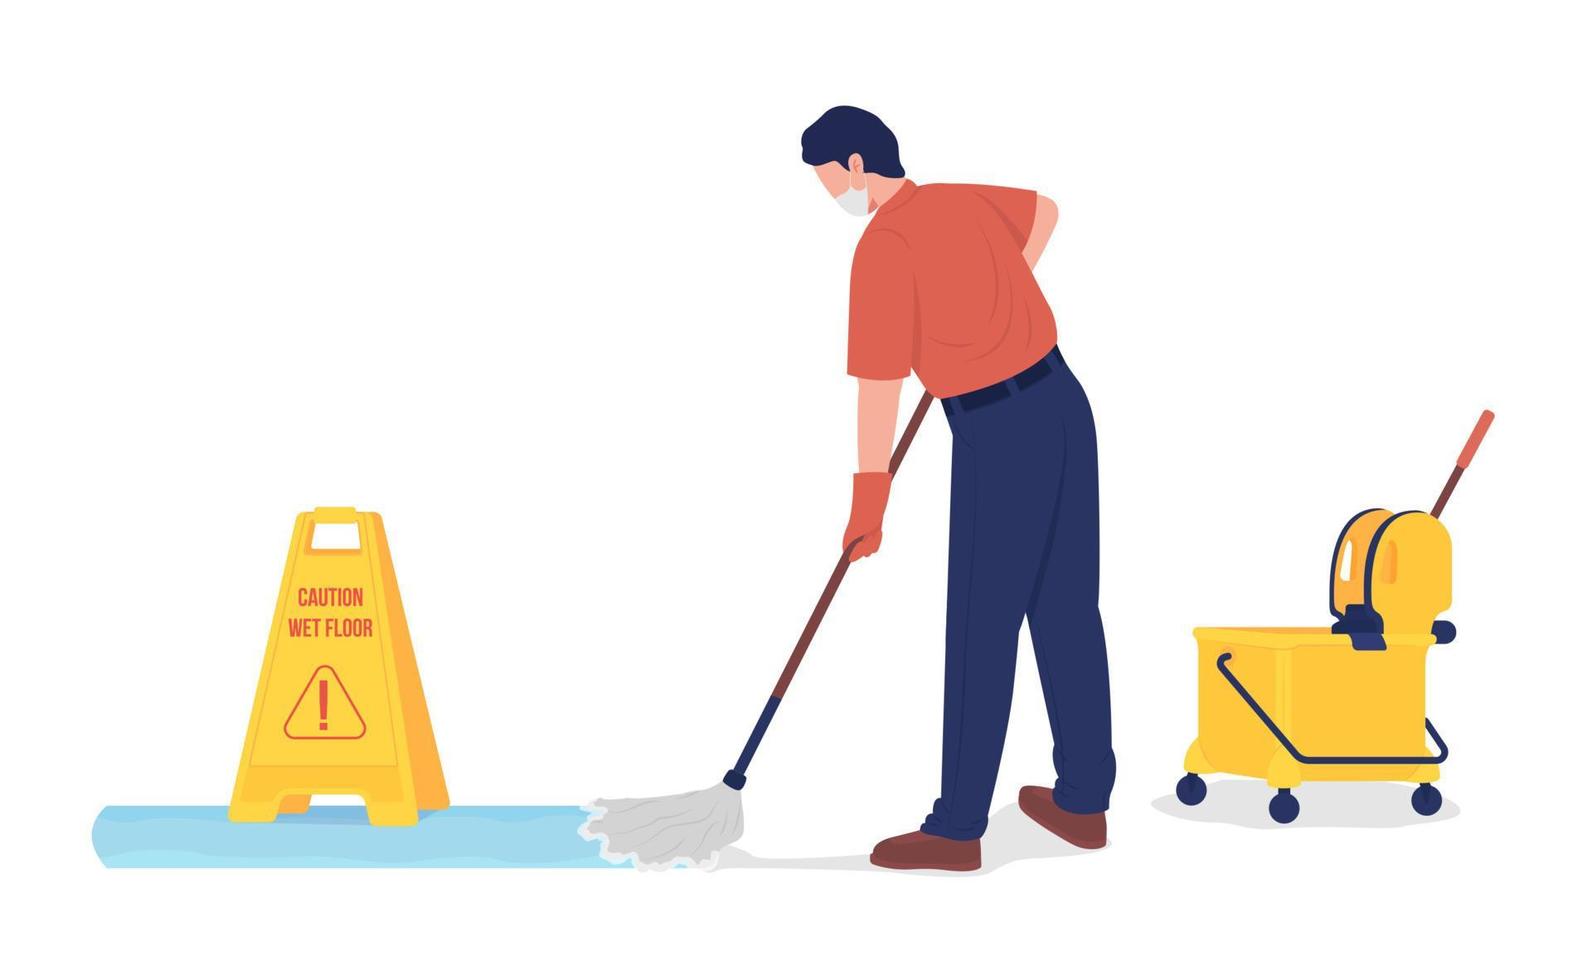 Janitor mopping floor semi flat color vector character